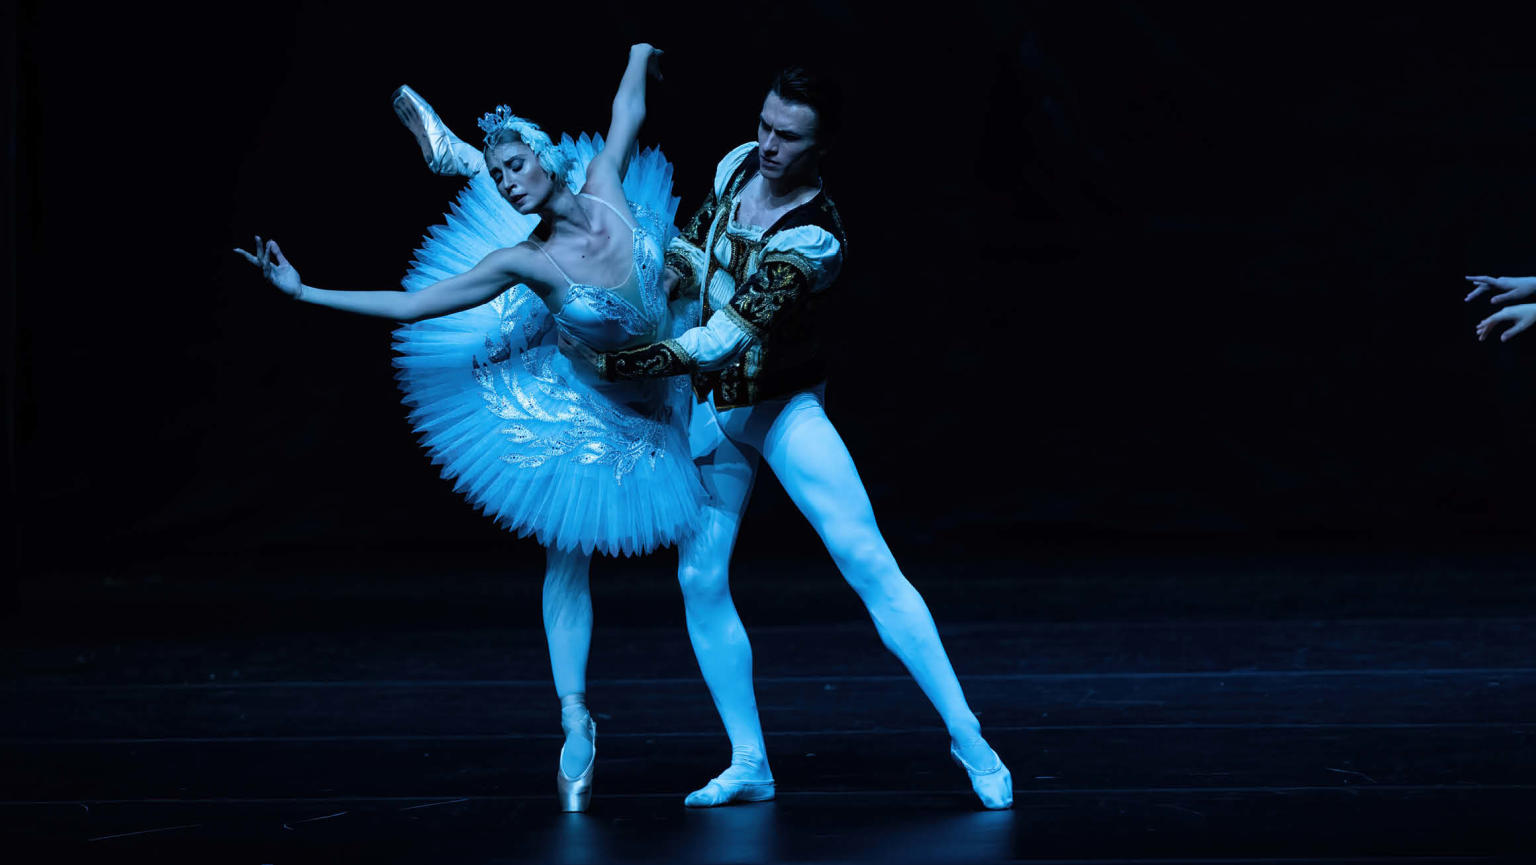 An image capturing a female ballerina in a tutu as she gracefully dances alongside a male danseur on a stage. 